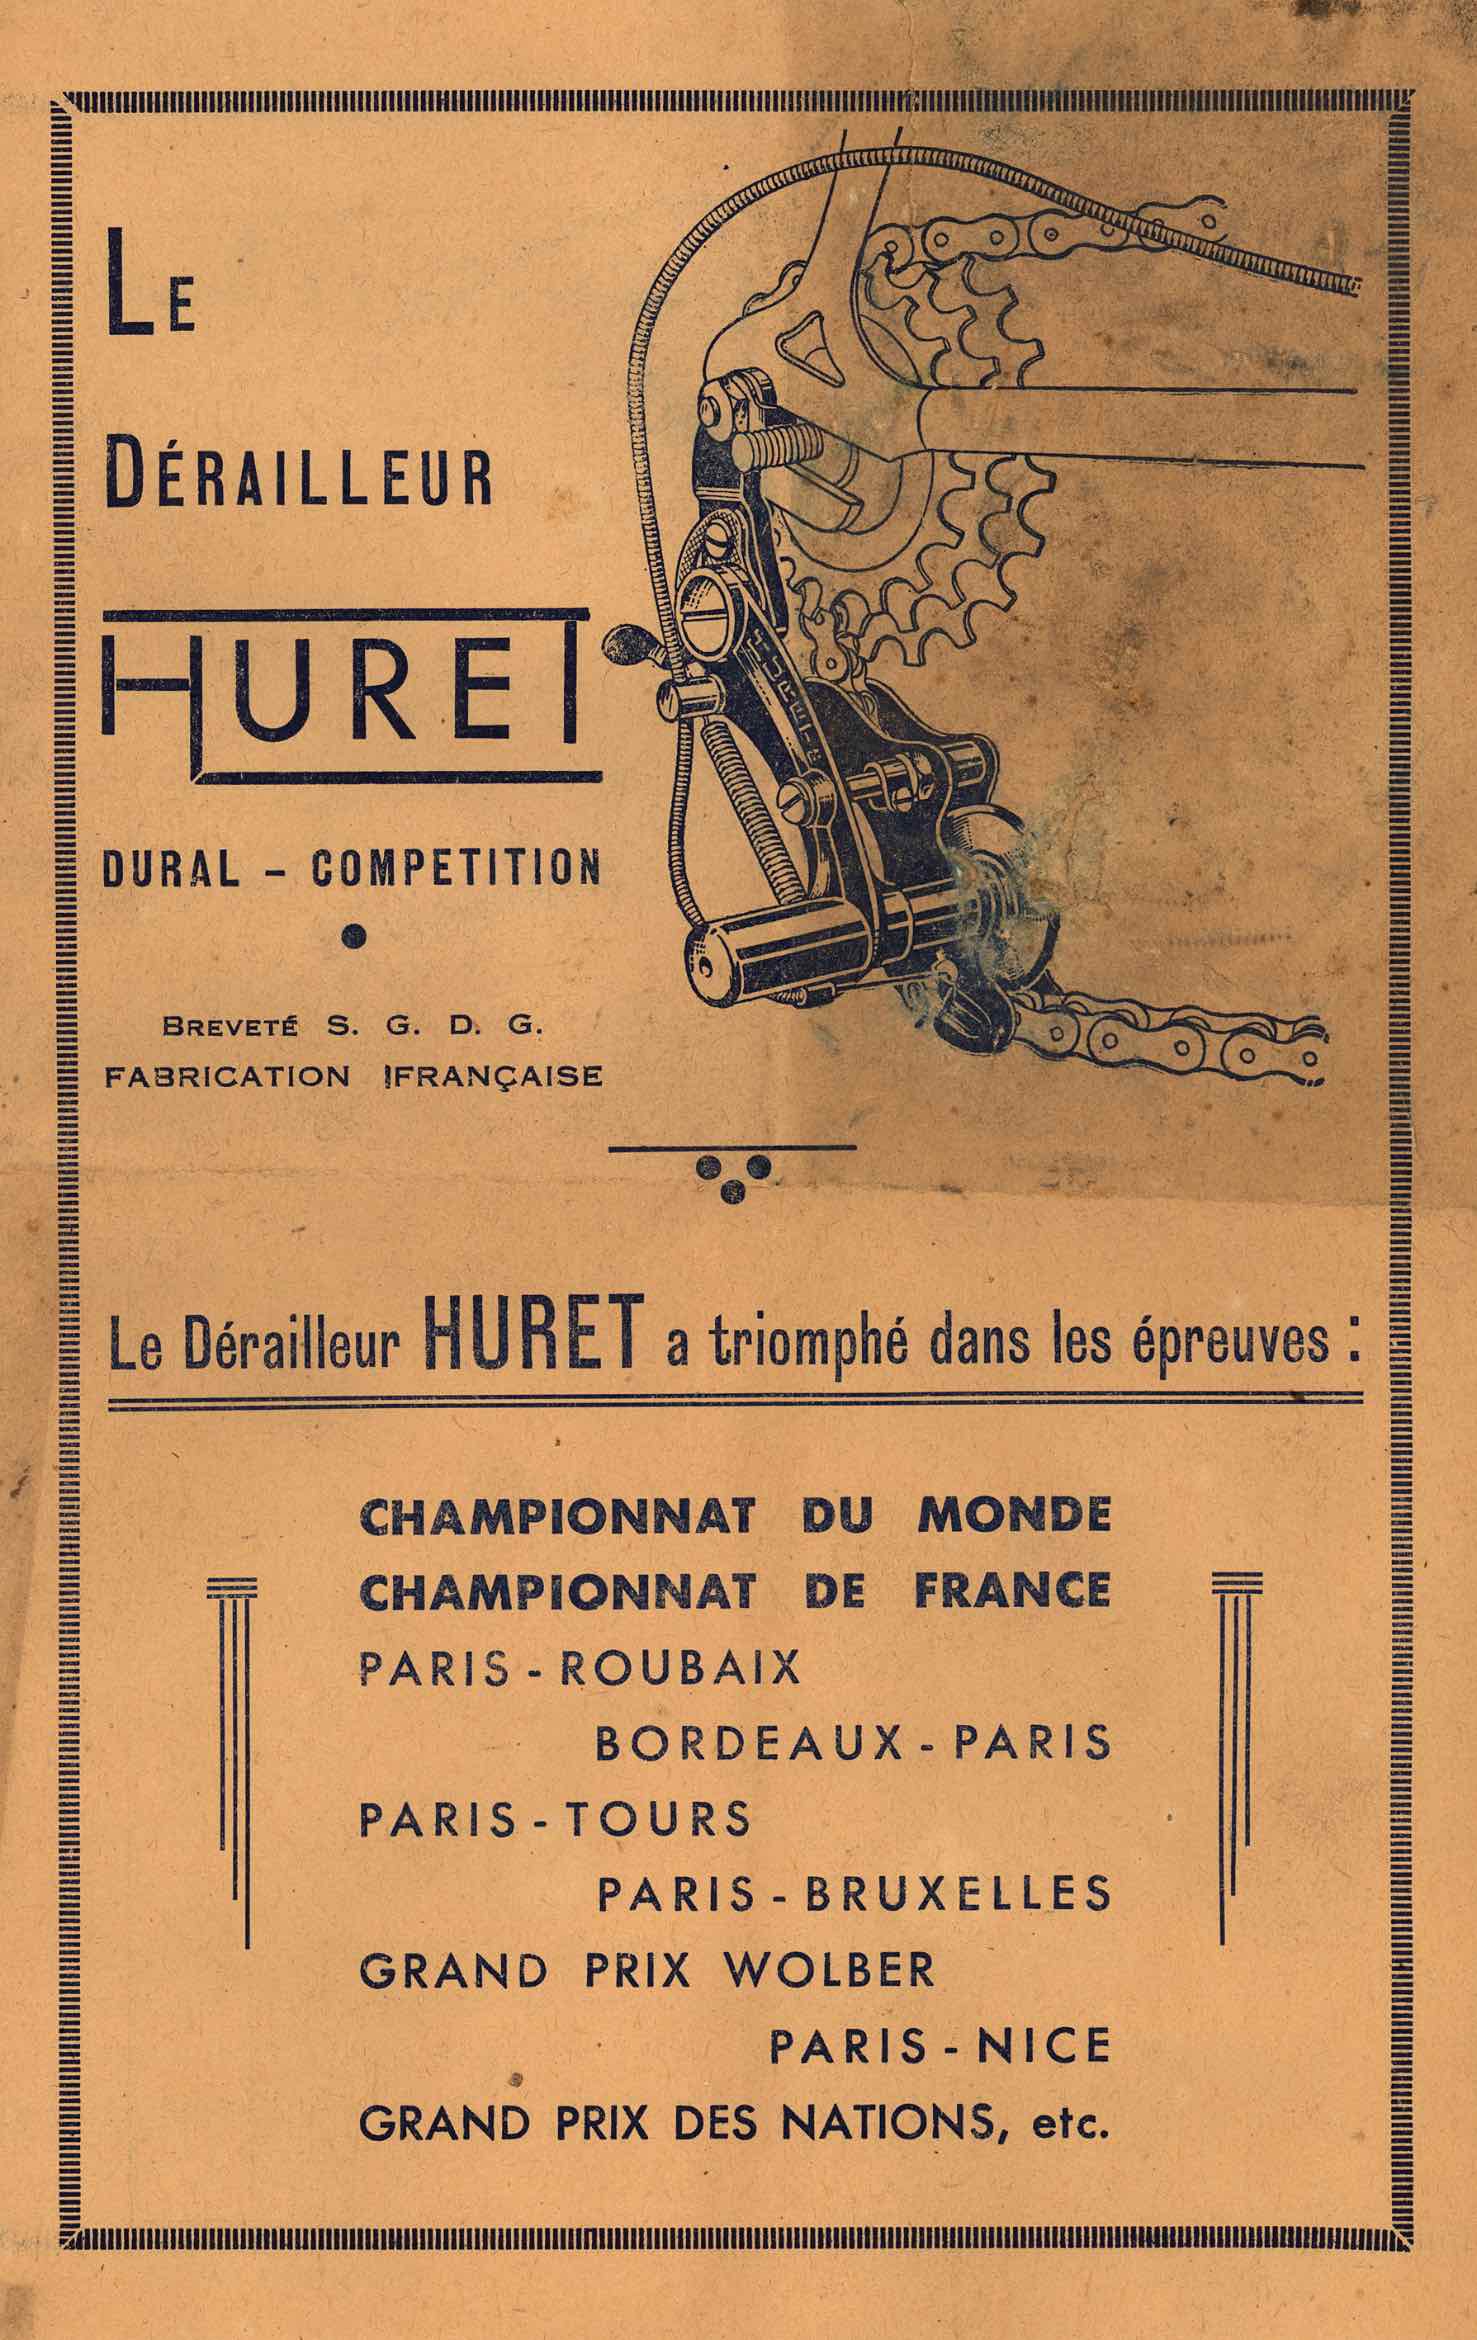 Huret Dural Competition - instructions scan 1 main image